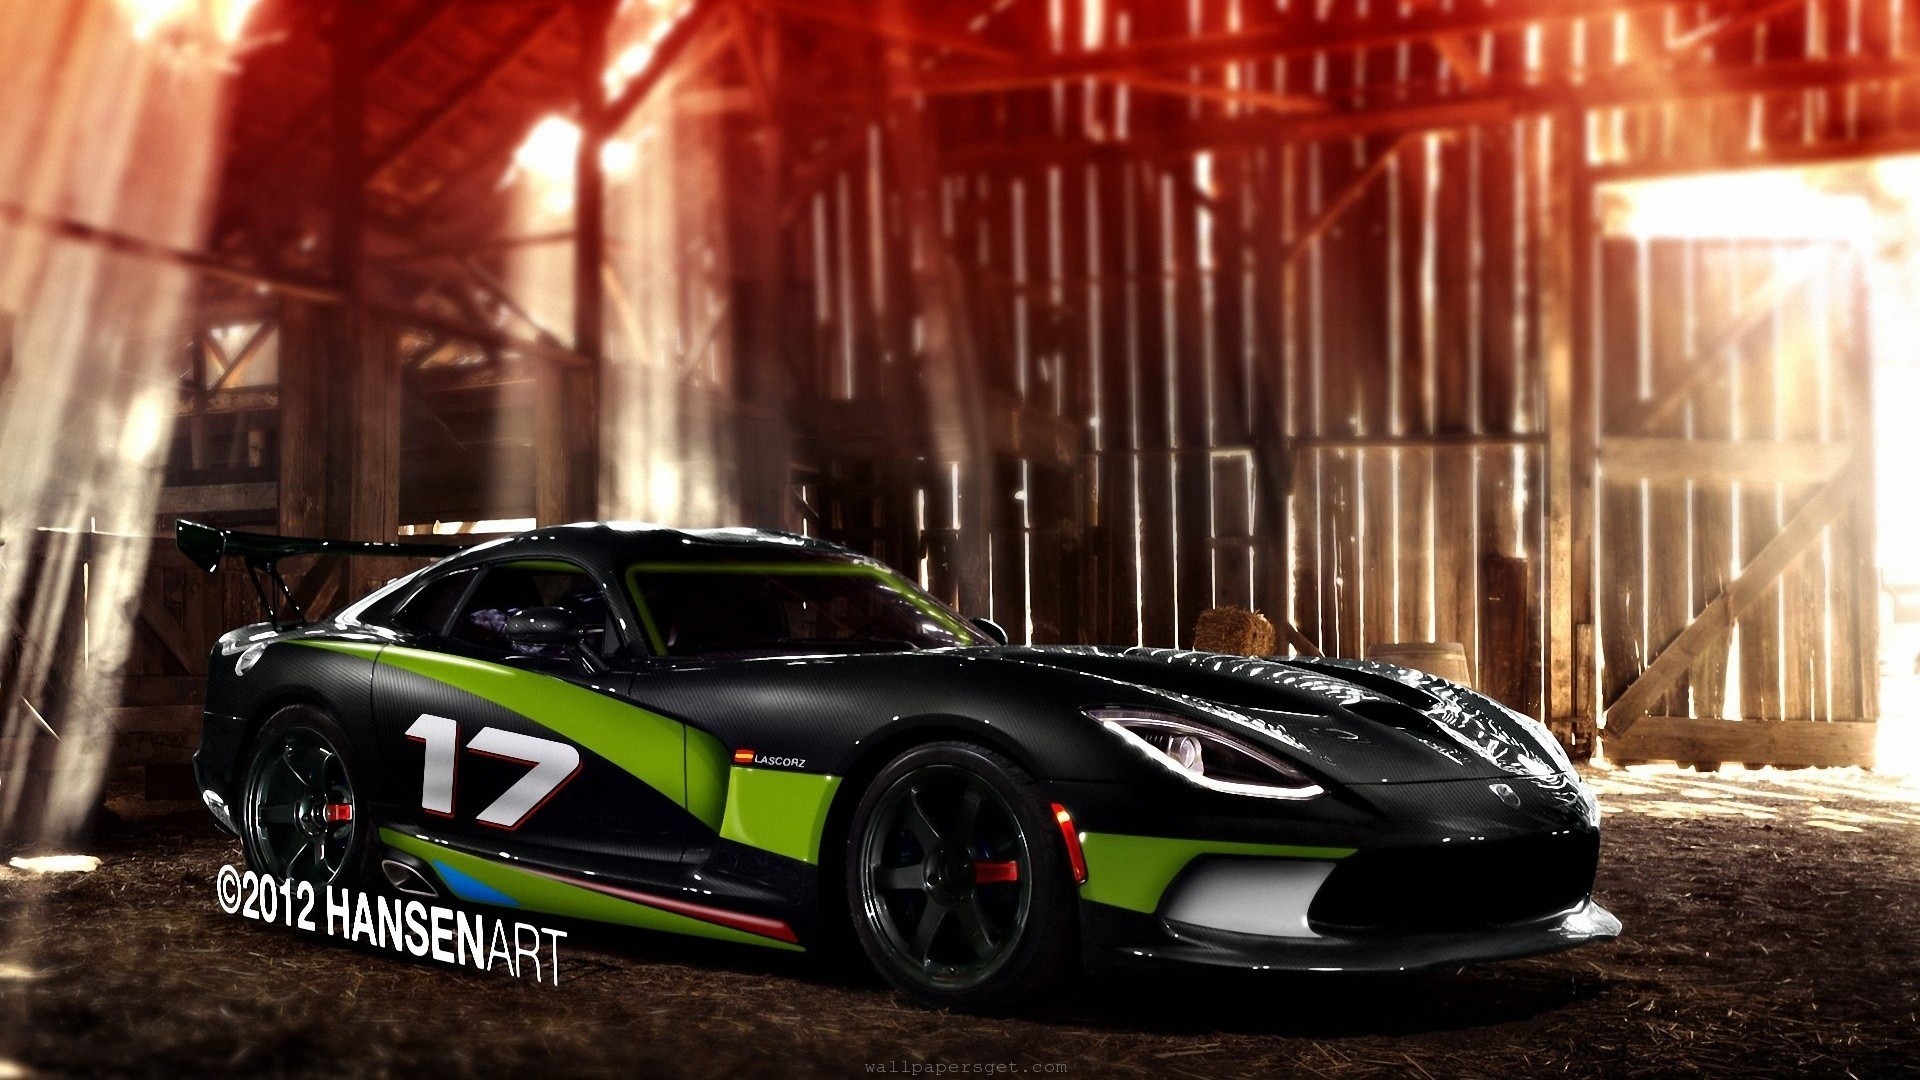 Free Full Hd Modified Car Wallpapers Images Backgrounds Viper Tuning ...